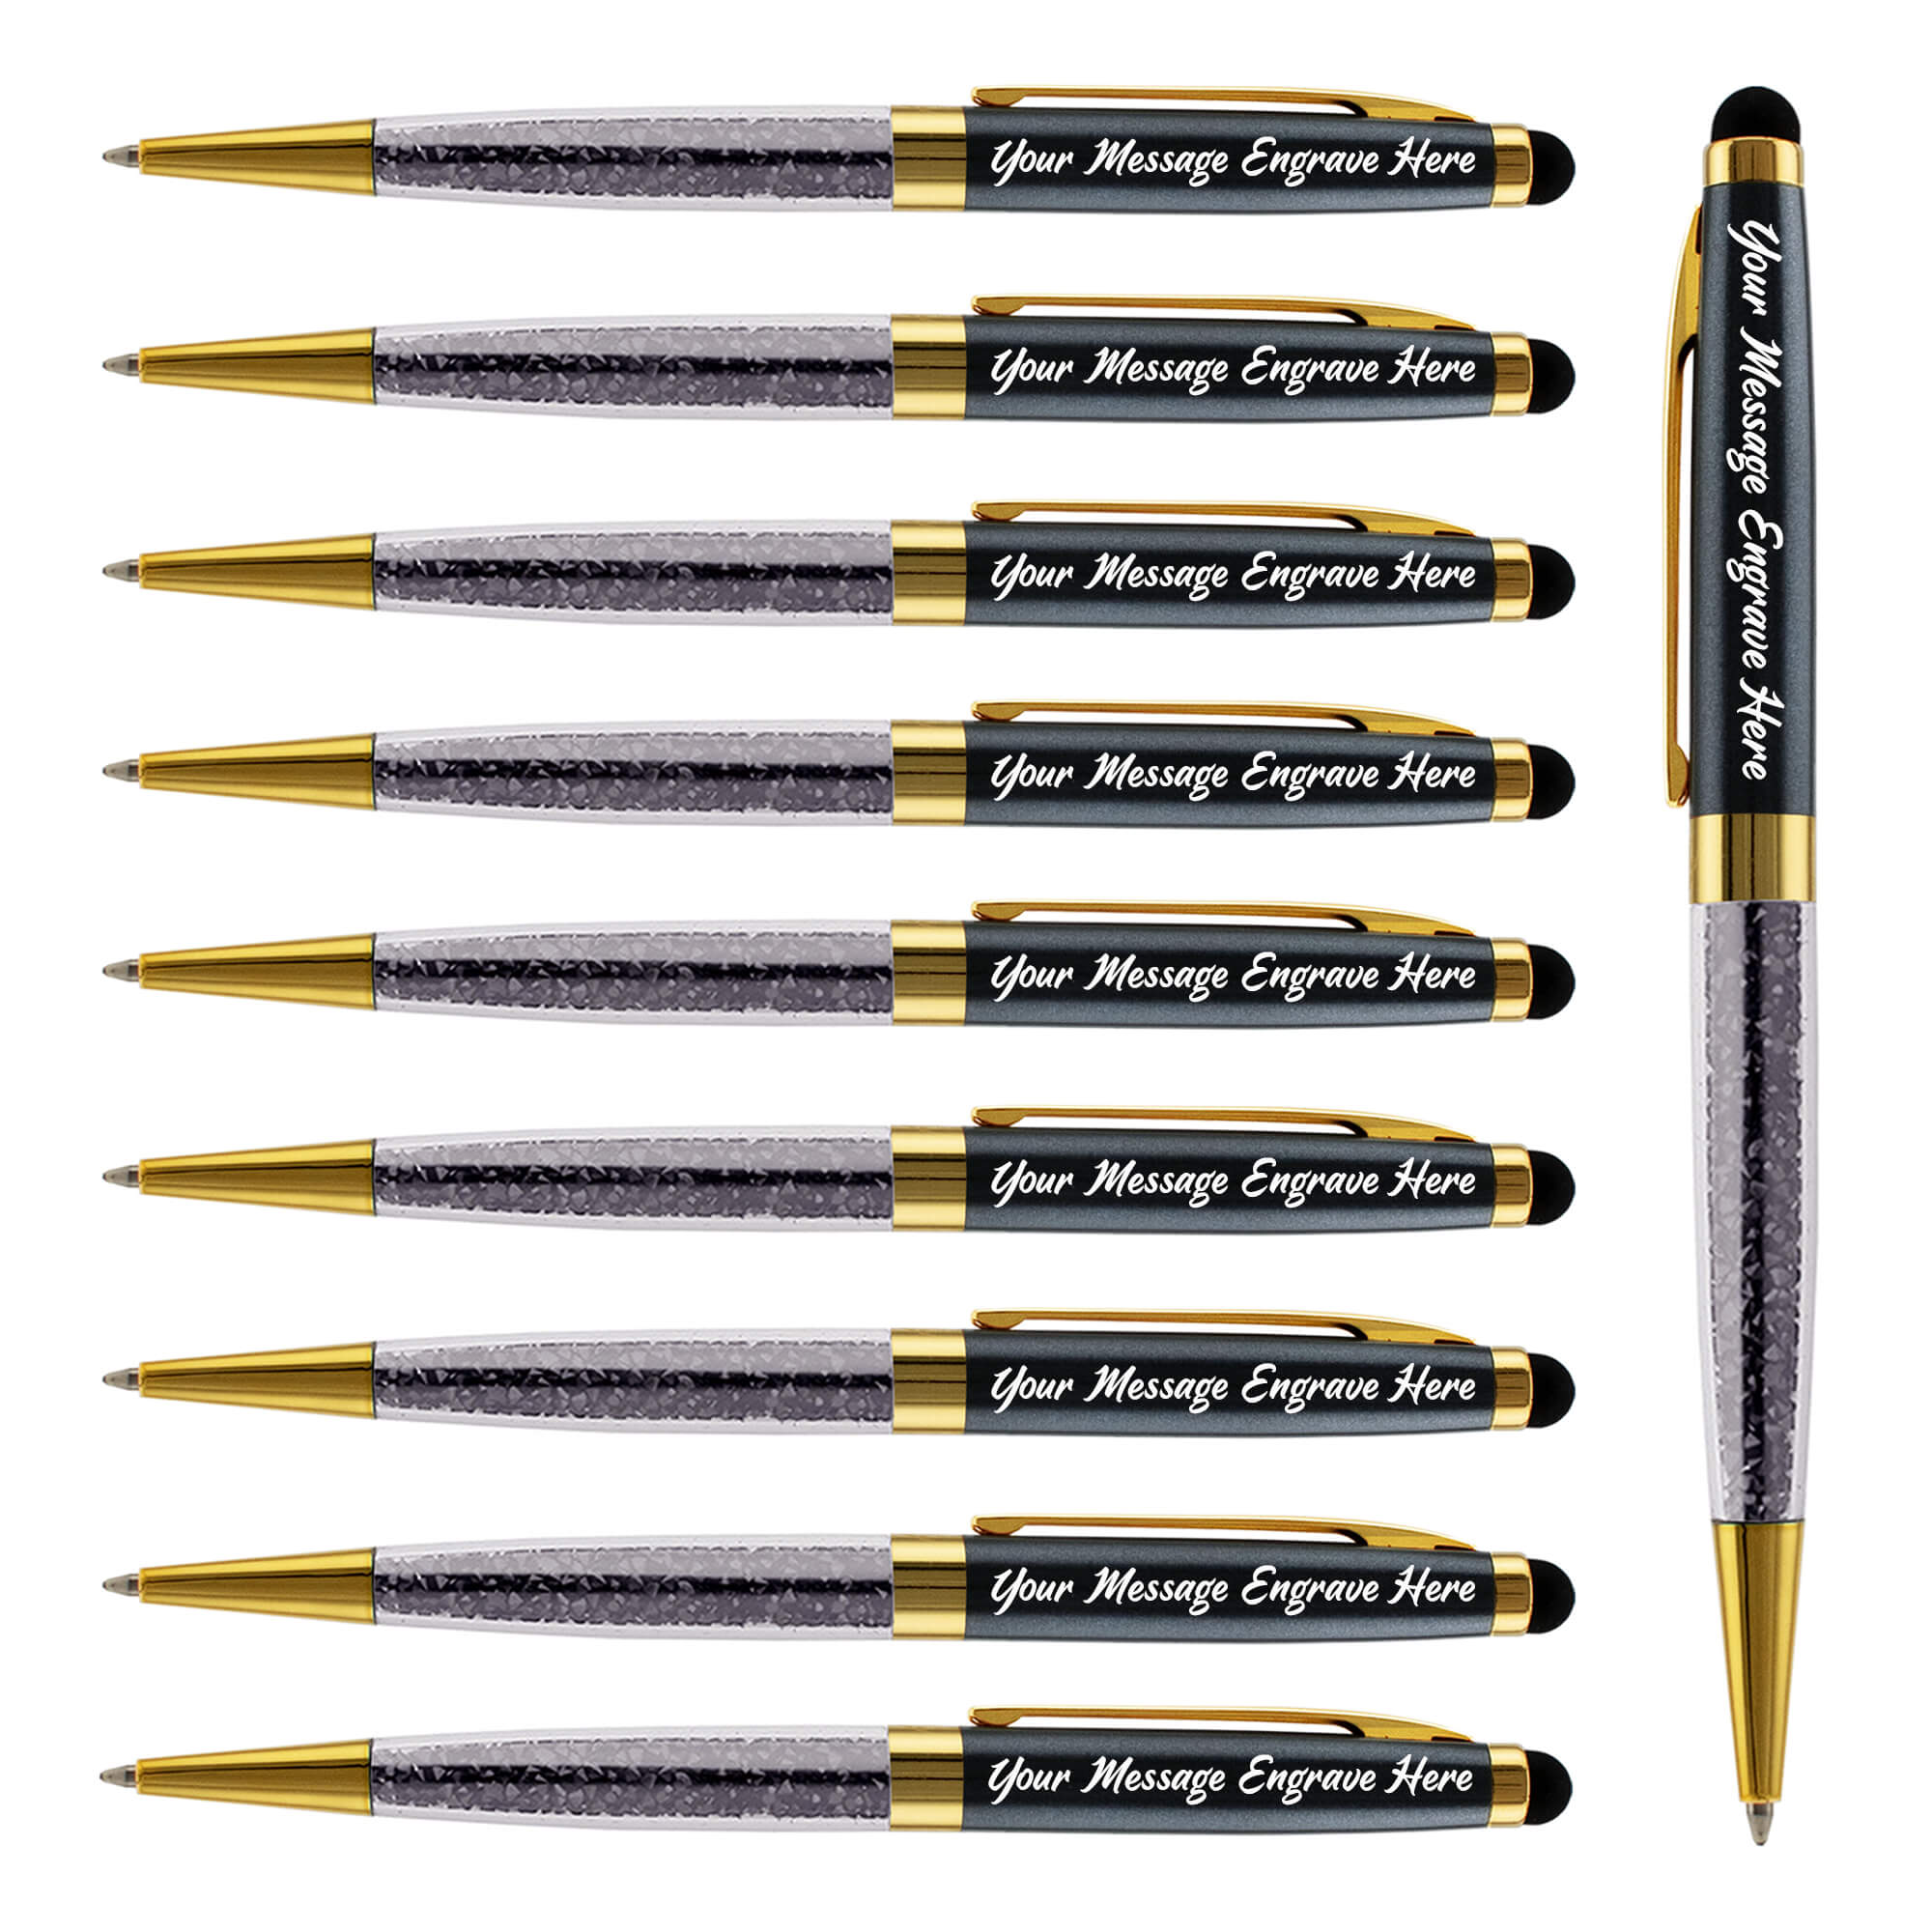 Sensy Gifts Personalized Name Engraved Metal Ball Pen Gift Set For Gifting  with Box, Name Printed